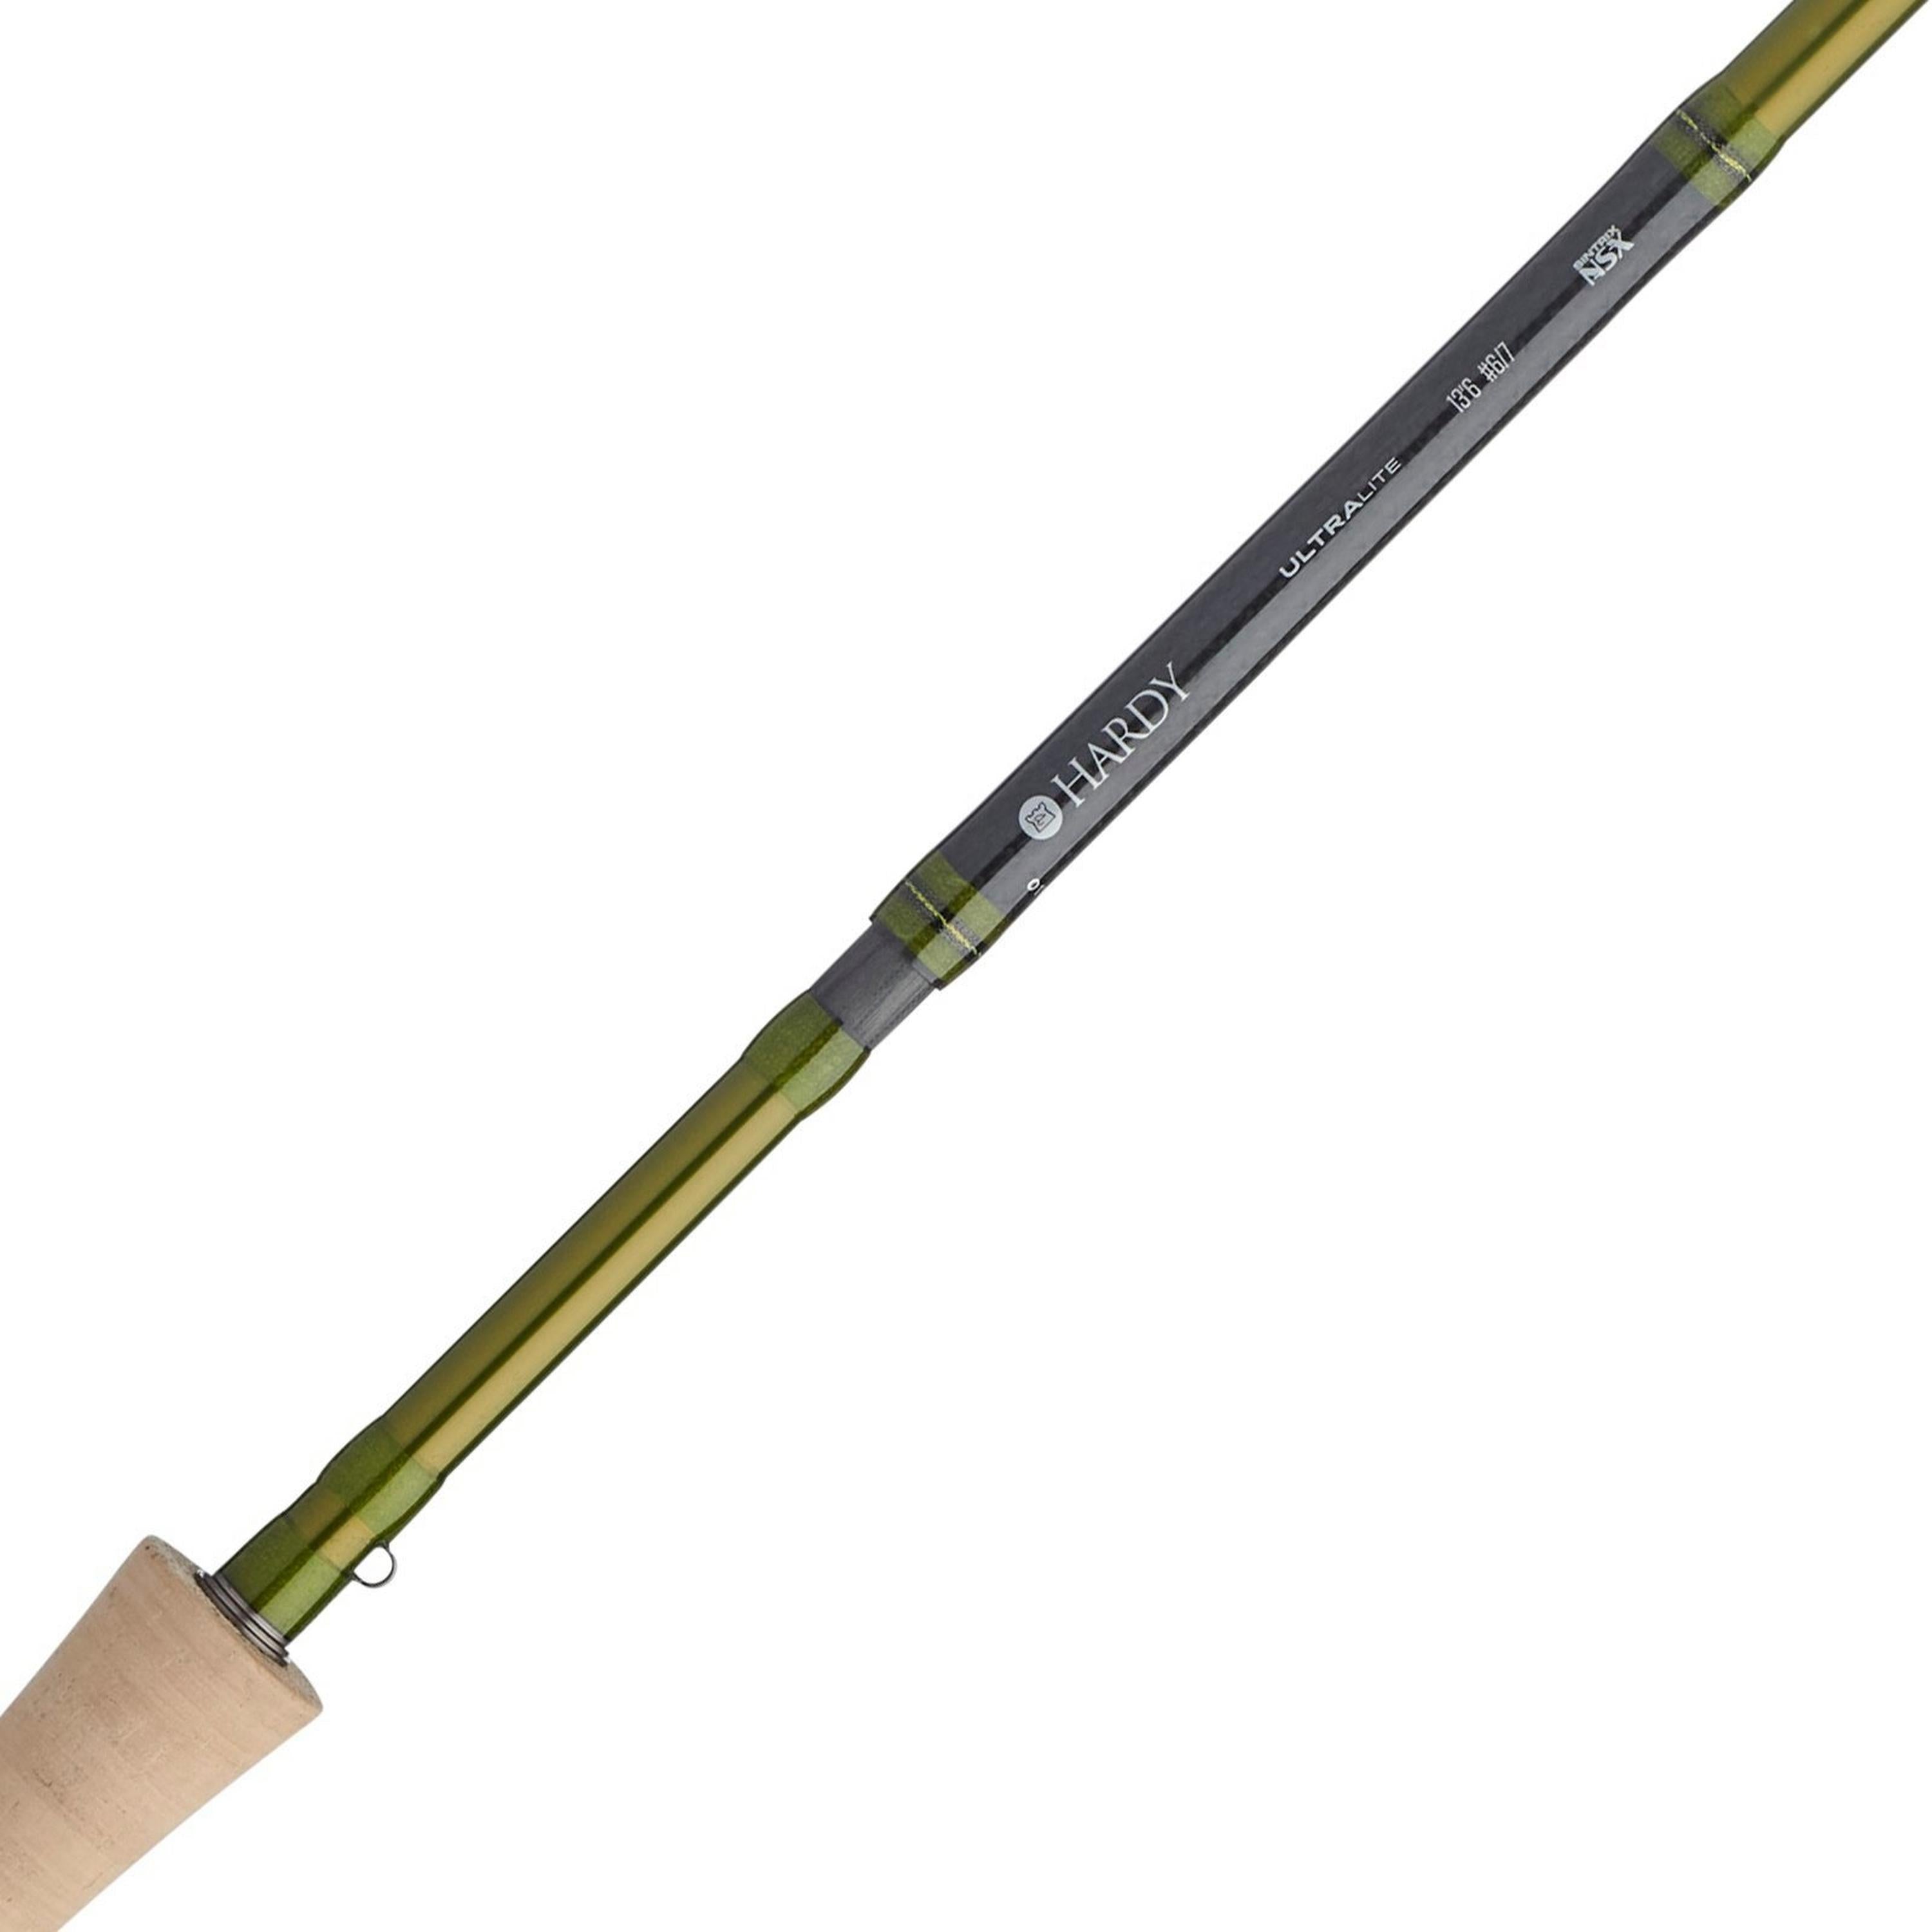 HARDY ULTRALITE NSX DH 6PCE FLY RODS